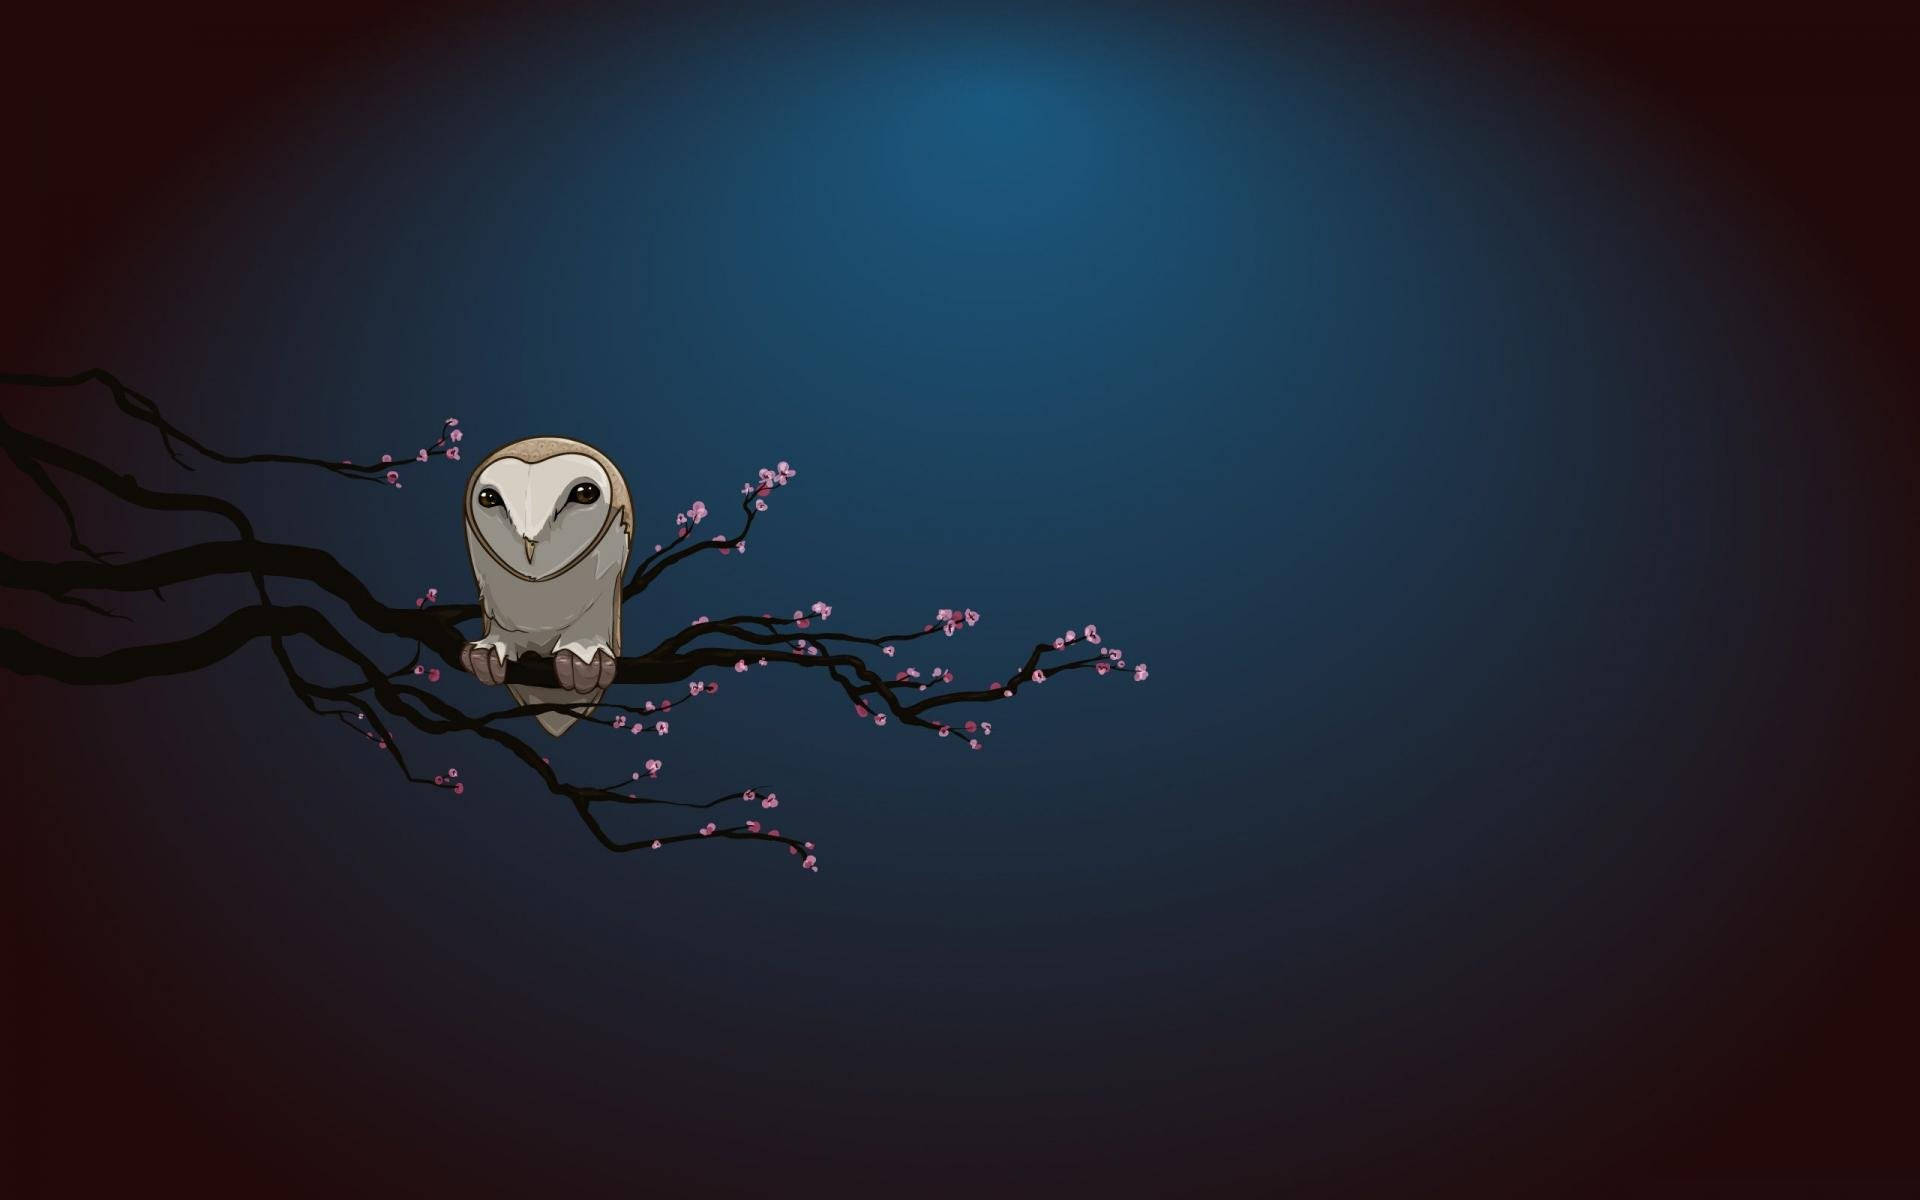 Free Blue Owl Wallpaper Downloads, [100+] Blue Owl Wallpapers for FREE |  